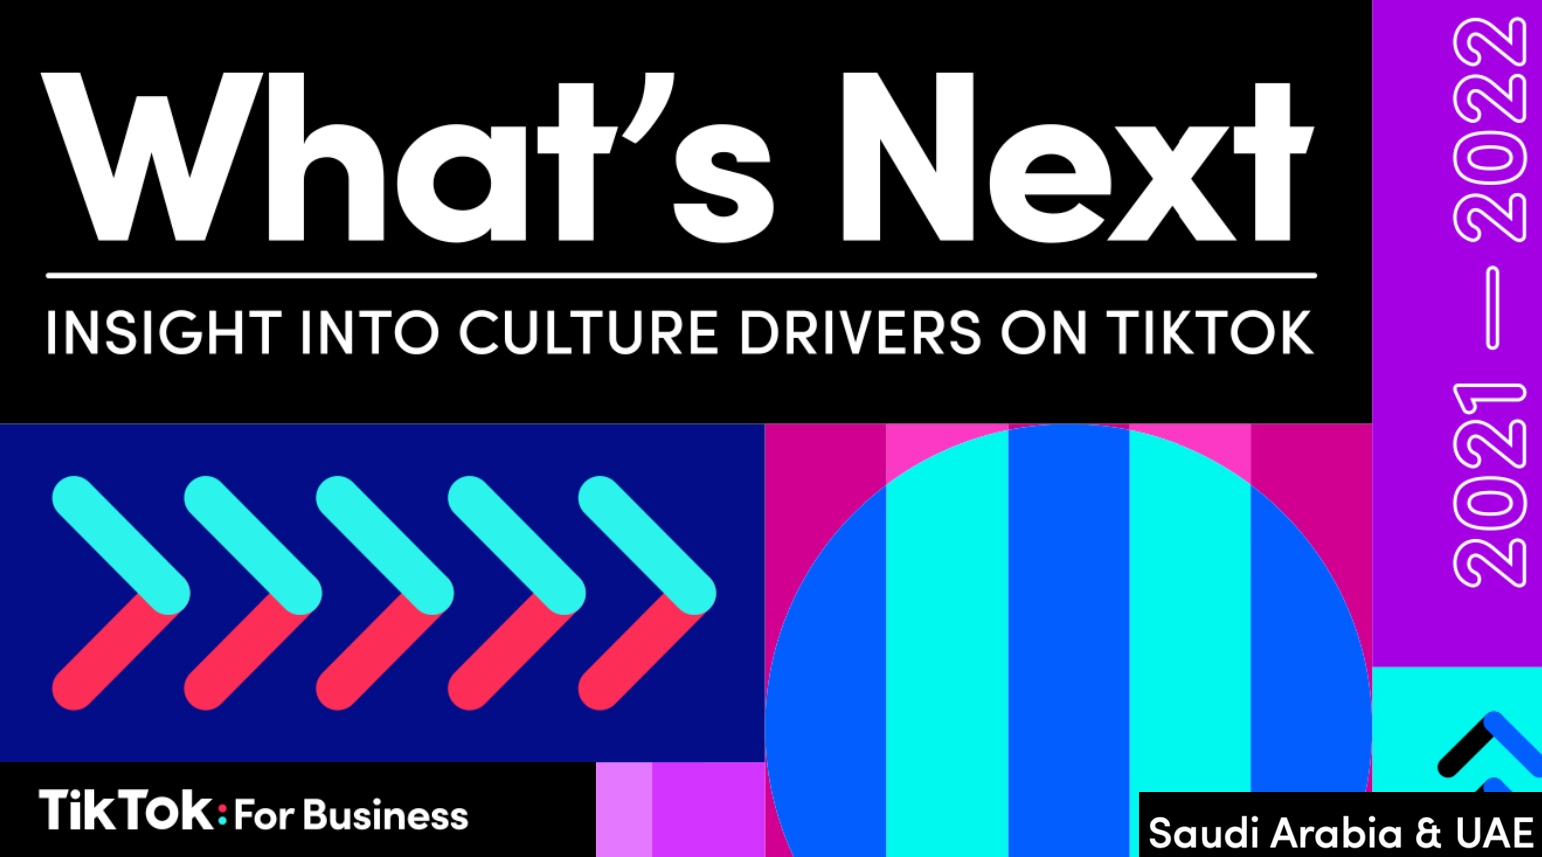 TikTok for Business Reveals Key Insights Into Culture Drivers in 2022